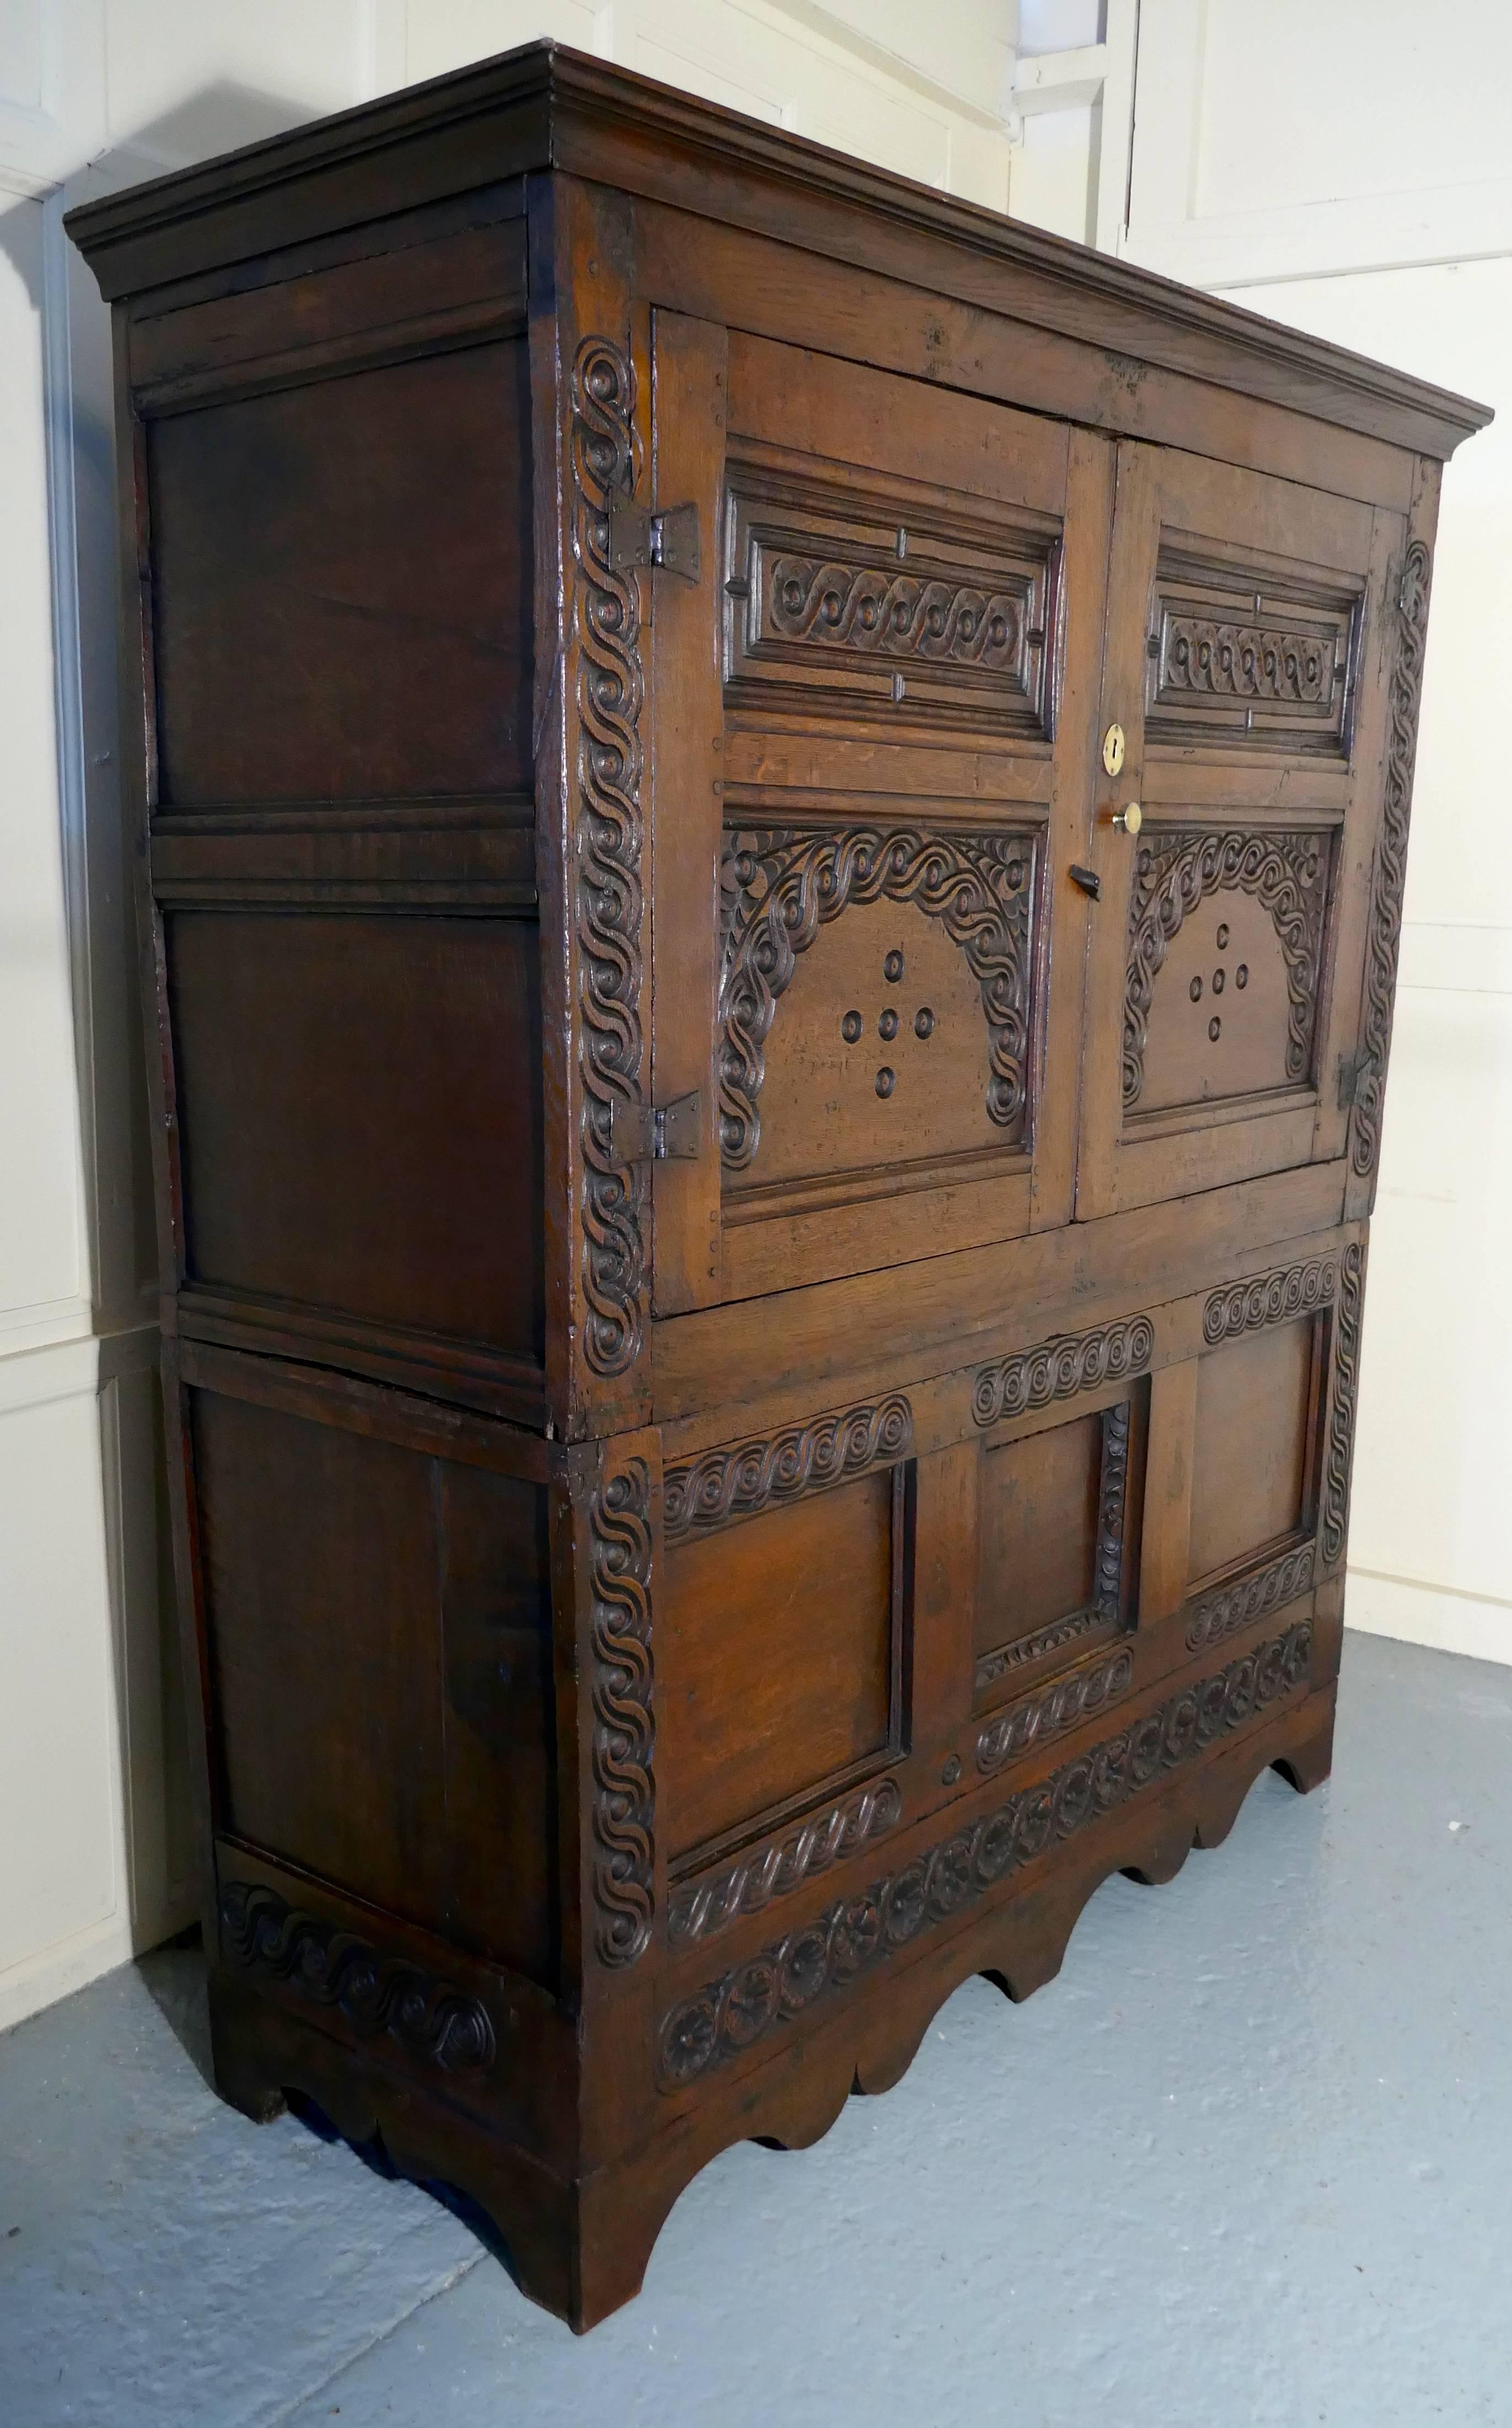 17th century Welsh oak housekeepers hanging cupboard

This old and roomy cupboard is made in solid oak and needless to say it is very heavy, luckily it does come into two pieces for transportation
The two carved panels doors enclose a deep